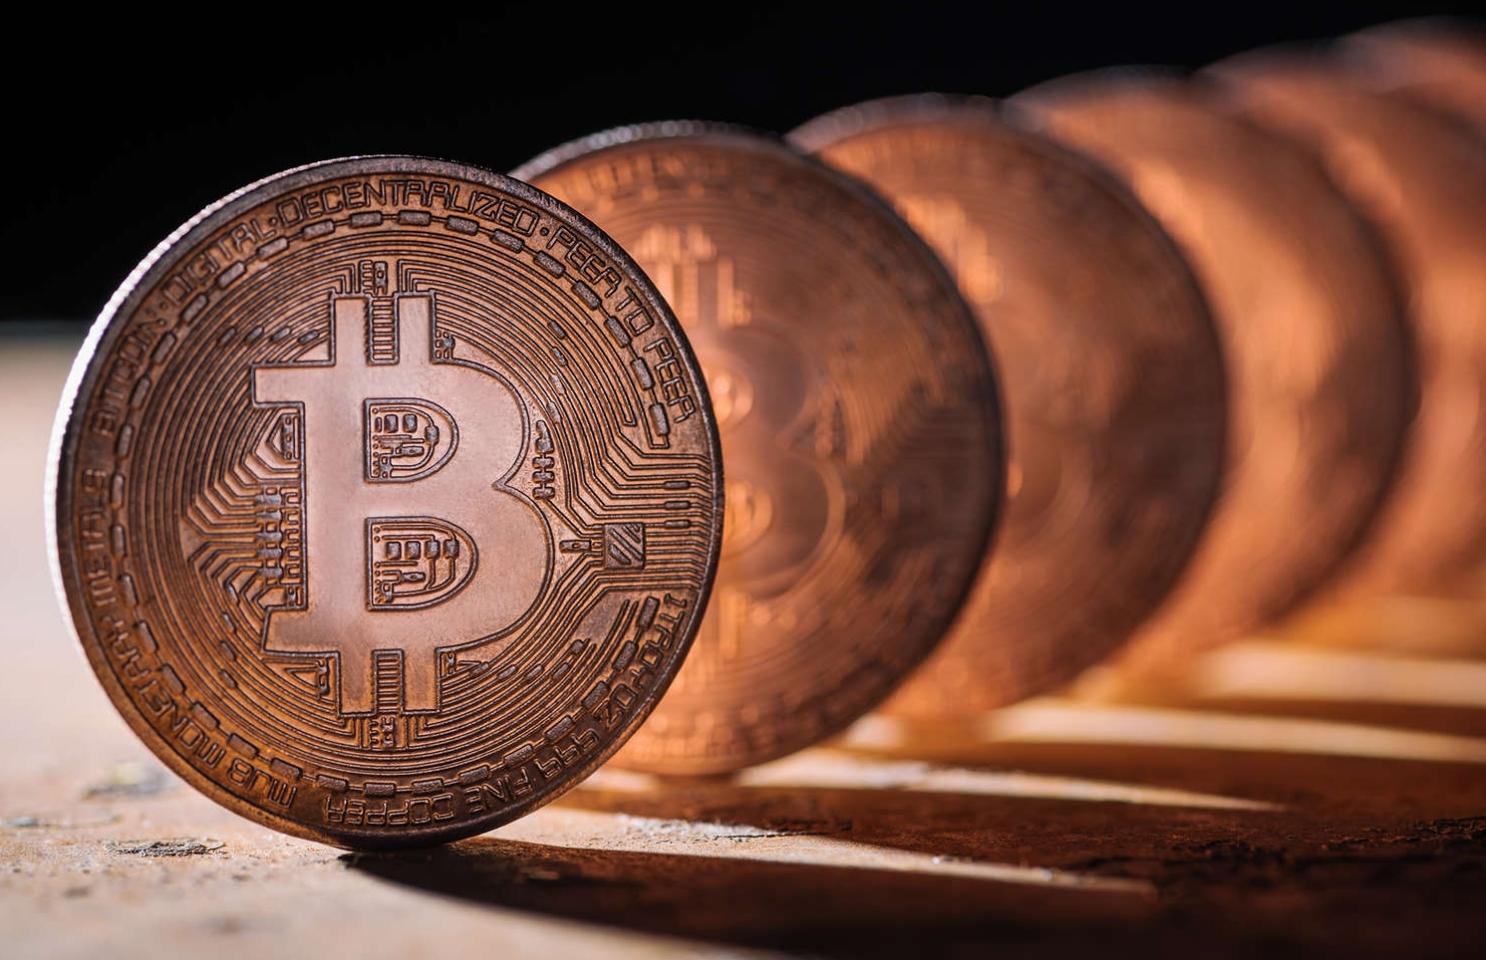 Standard Chartered predicted a fall in the price of bitcoin to $5,000.